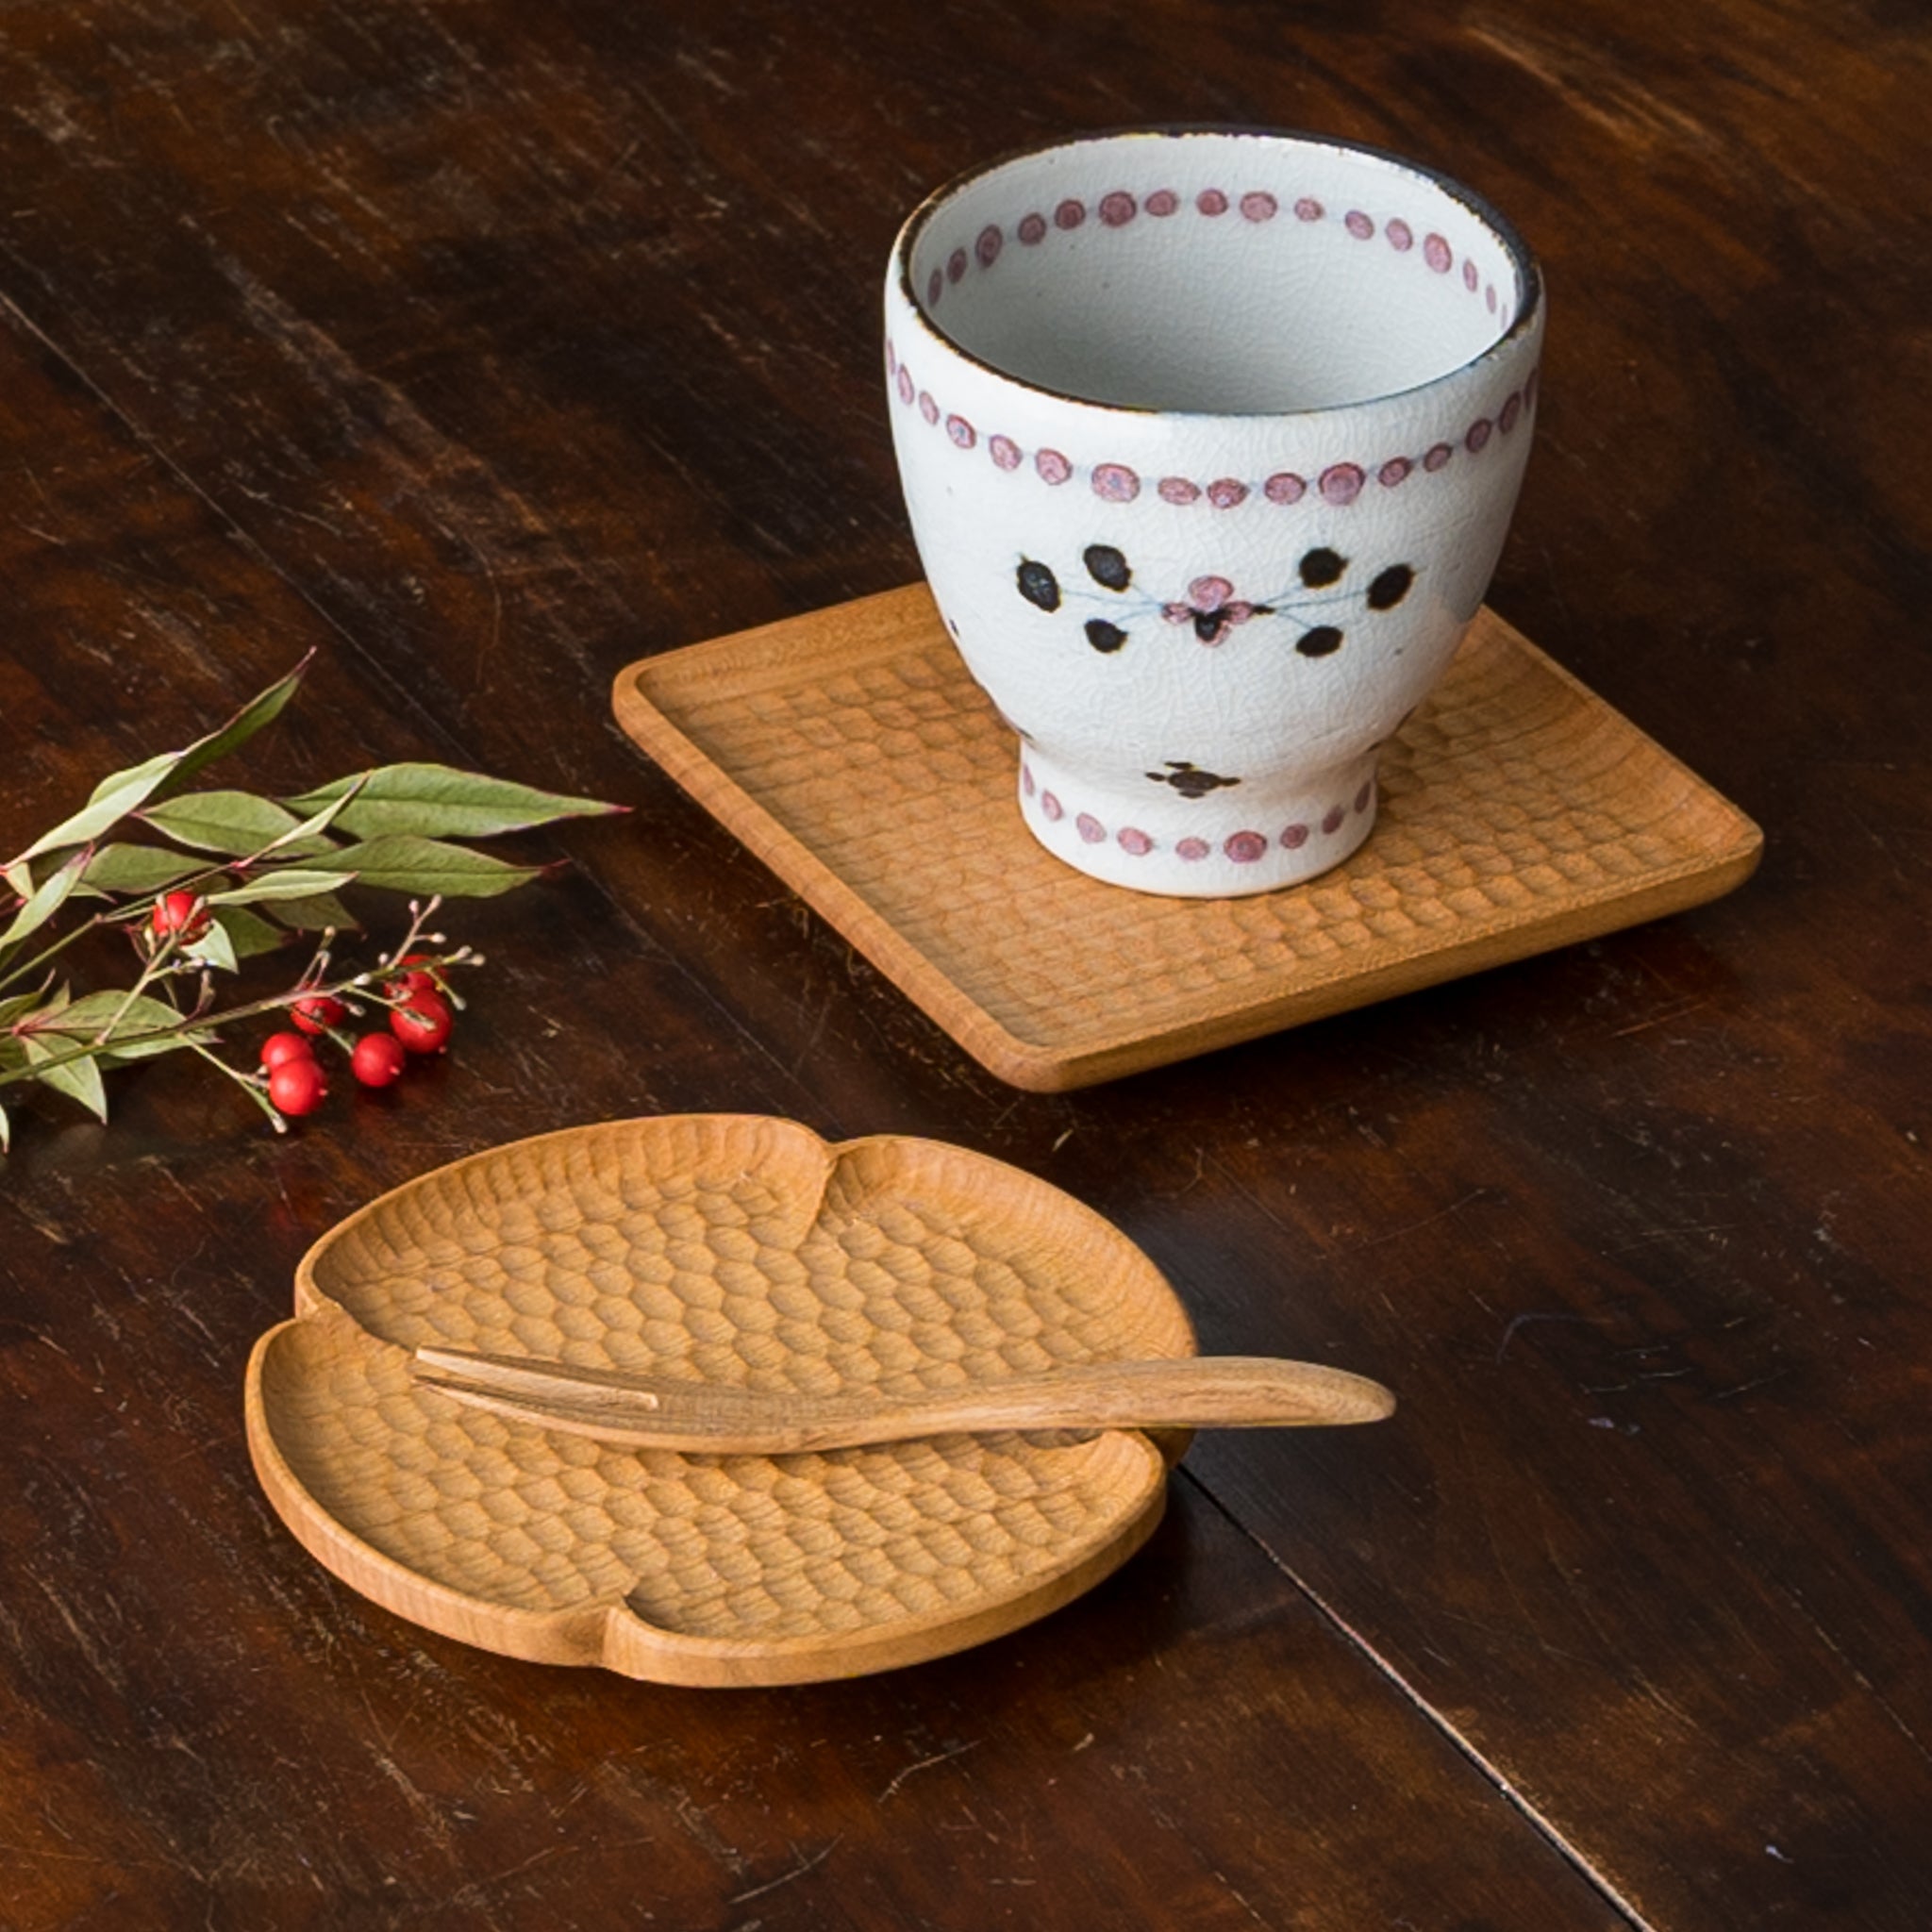 A flower-shaped coaster designed by Kazunori Gentakatsuka, a wonderful wooden workshop with a small snack on it.